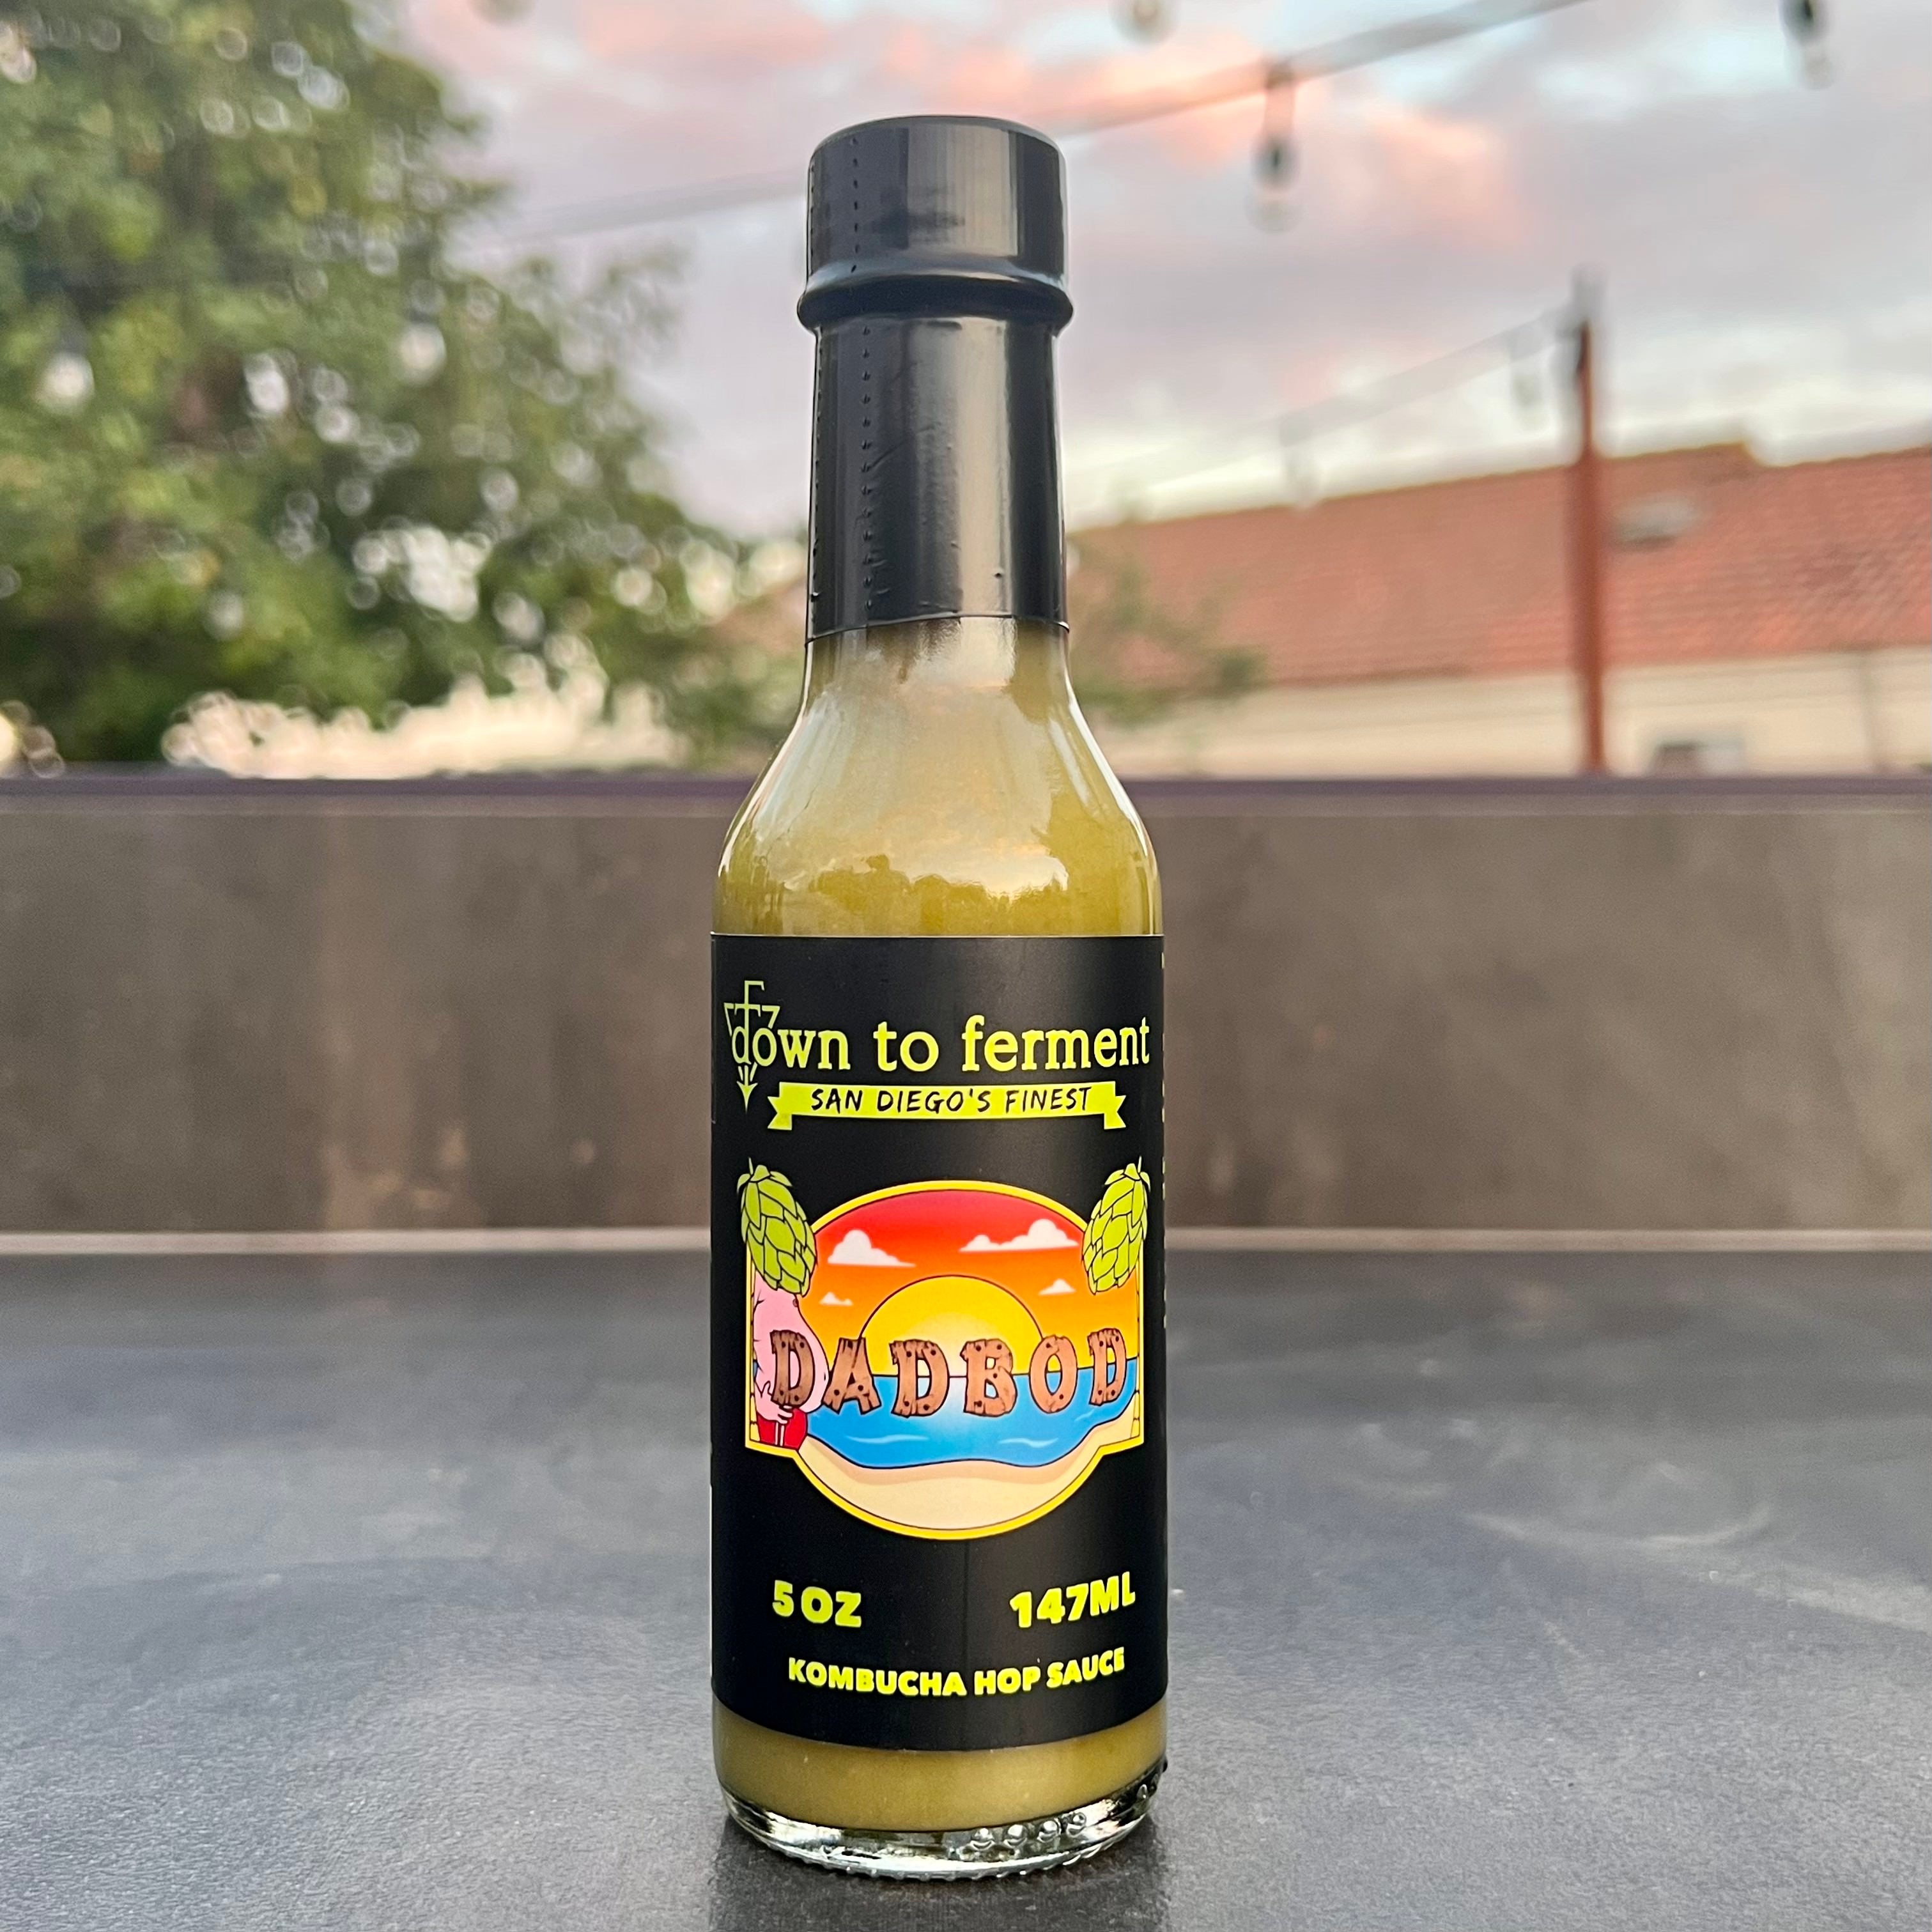 Dad Bod Hop Sauce - Down To Ferment, San Diego's Finest fermented, kombucha based hot sauce salsa verde with a twist.